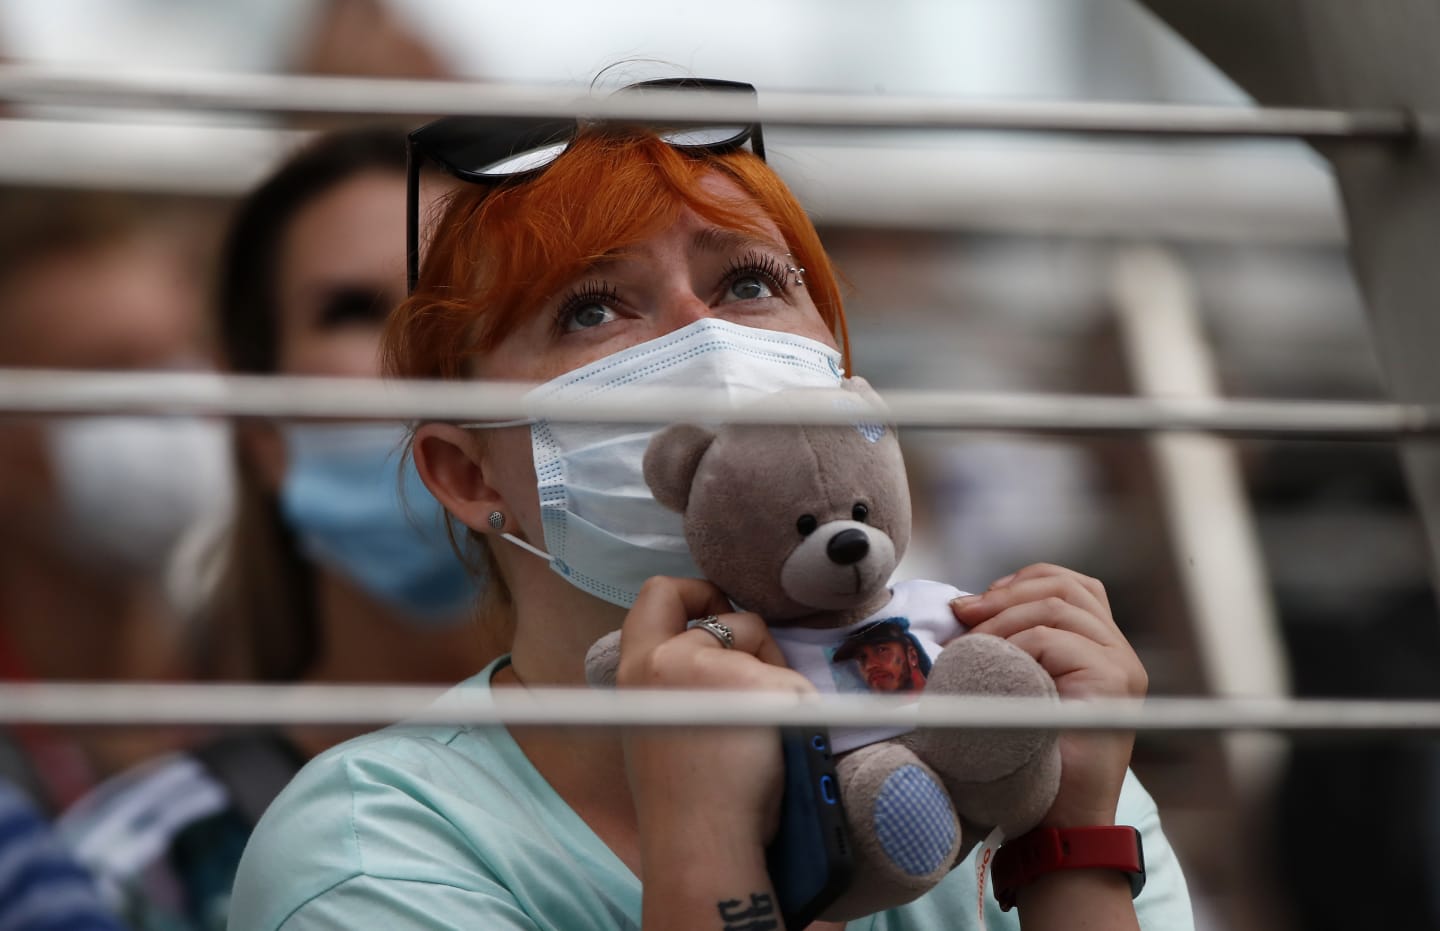 SOCHI, RUSSIA - SEPTEMBER 26: A fan holds a teddy bear as they watch the action during qualifying